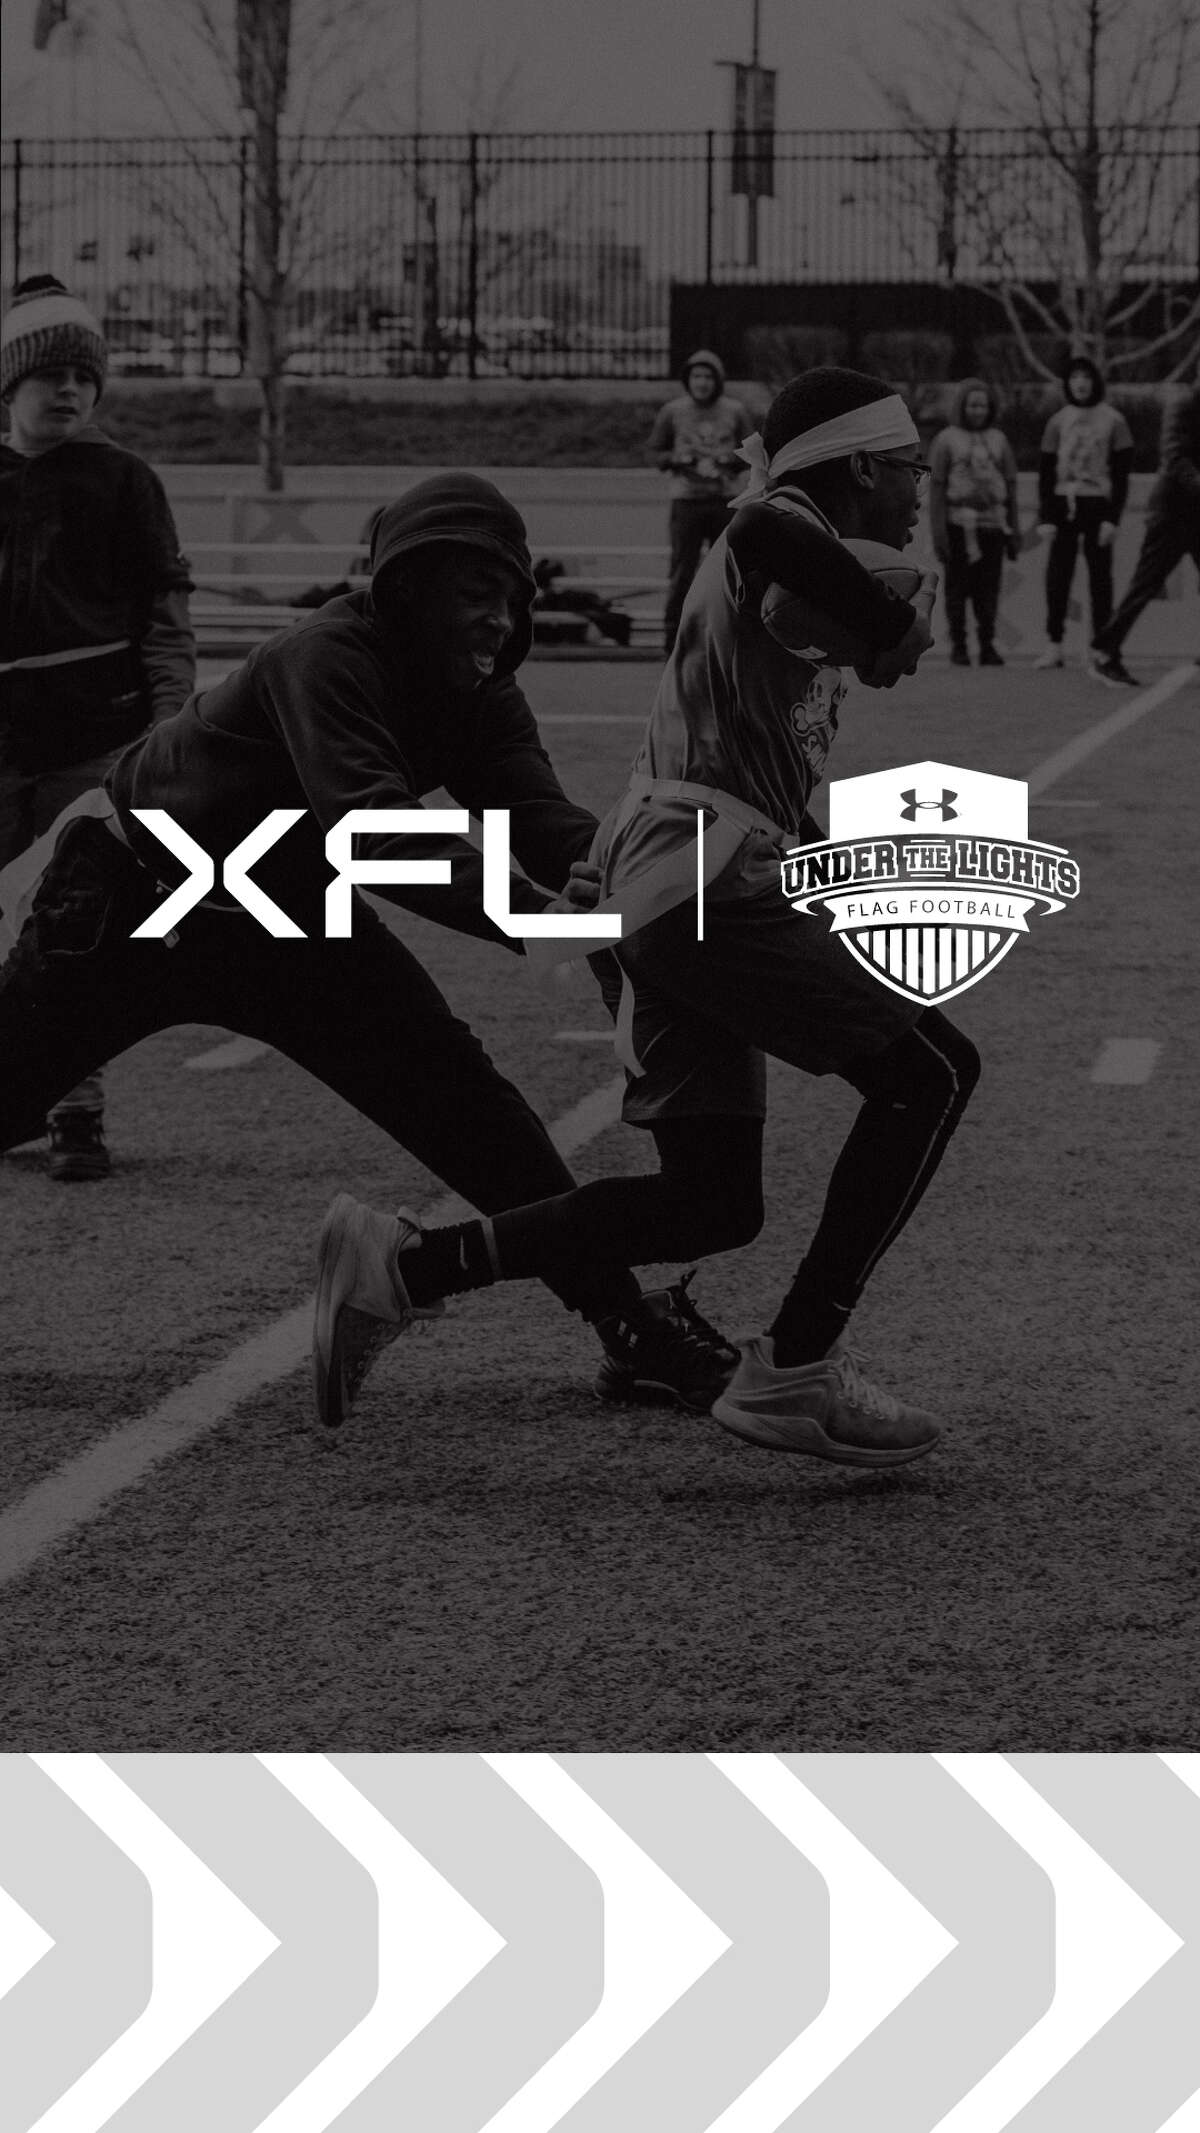 XFL & Under the Lights to co-host first-ever Youth Flag Football World Championship in San Antonio